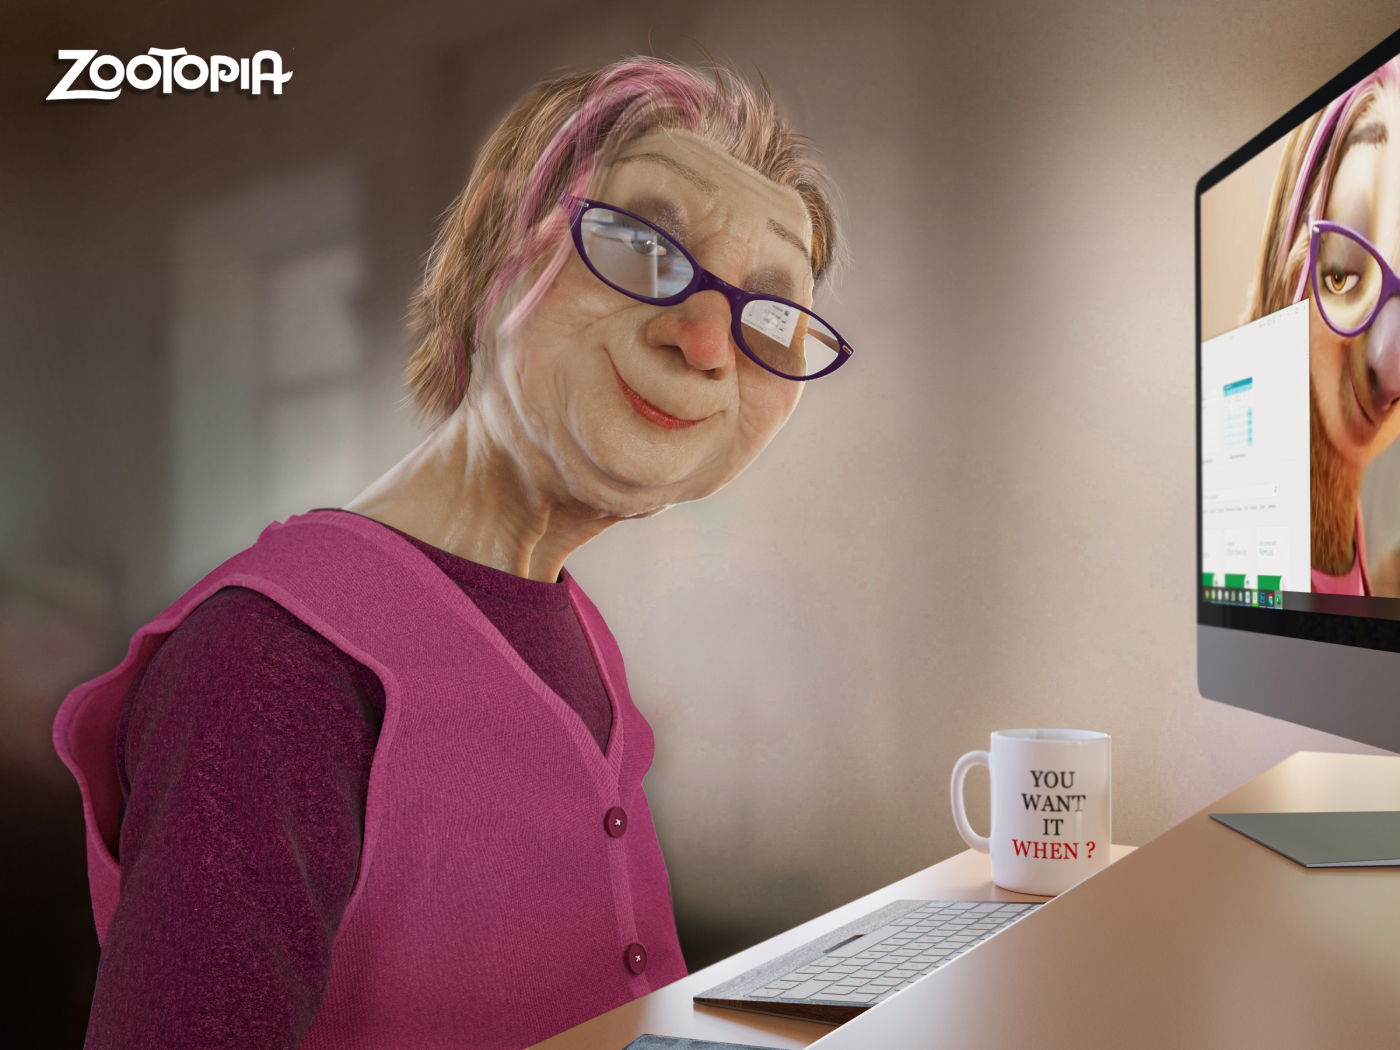 3D Model of a Granny Inspired by Zootopia's Sloth